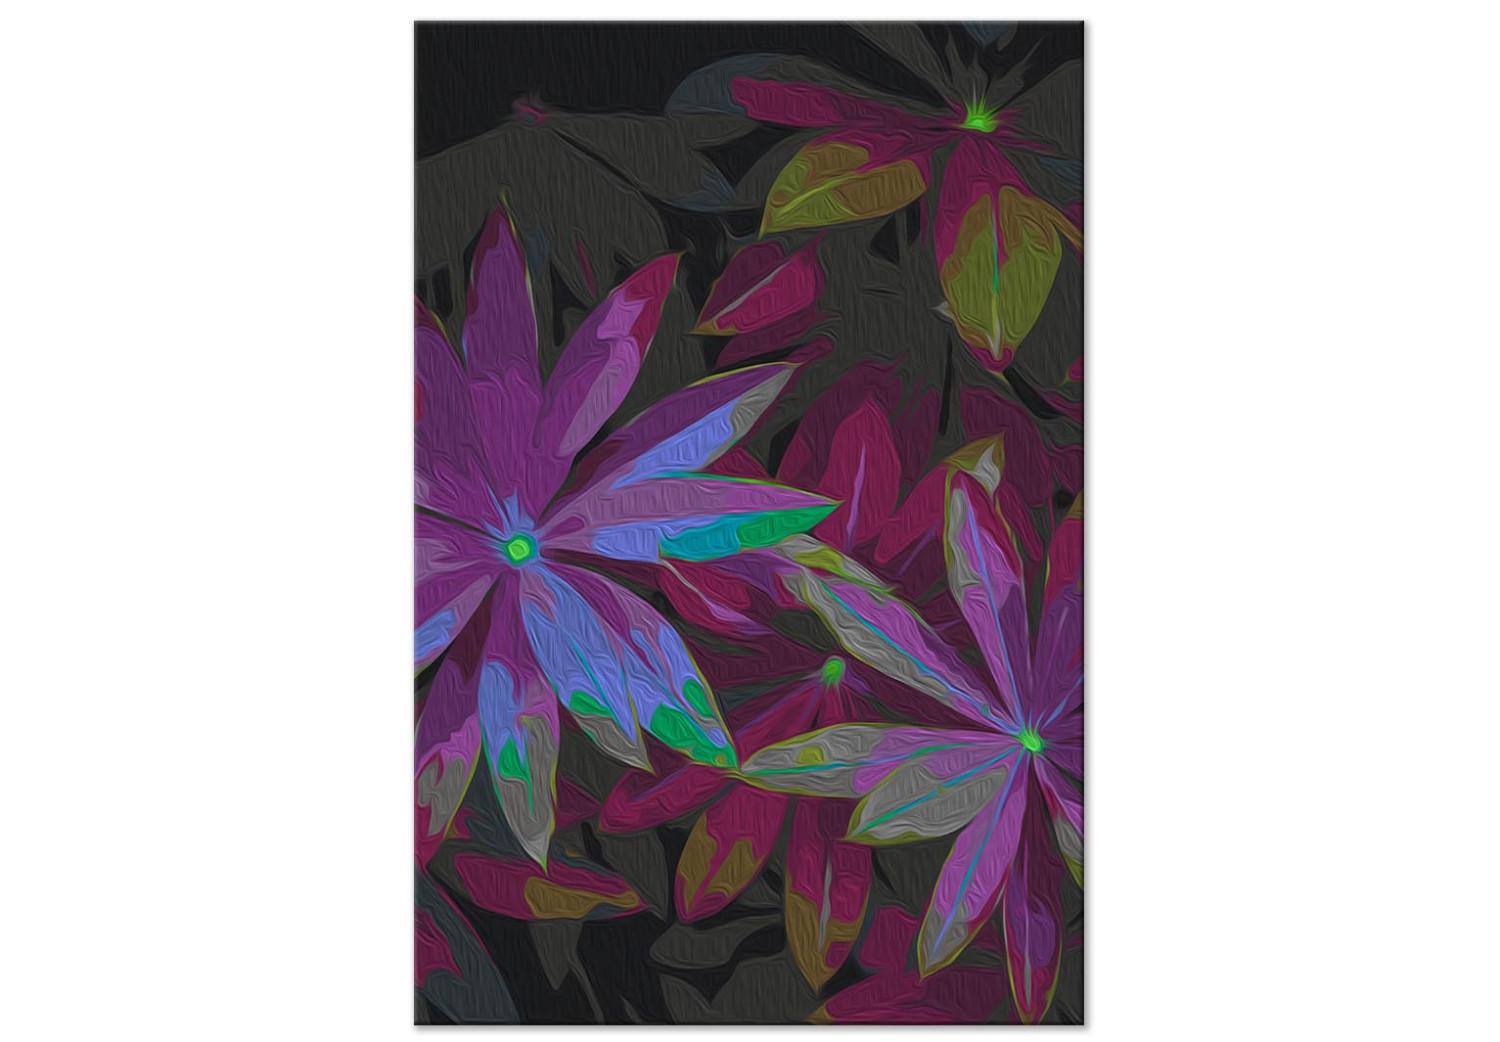 Cuadro para pintar con números Tropical Charm - Pointed Leaves in Green, Purple and Burgundy Colors